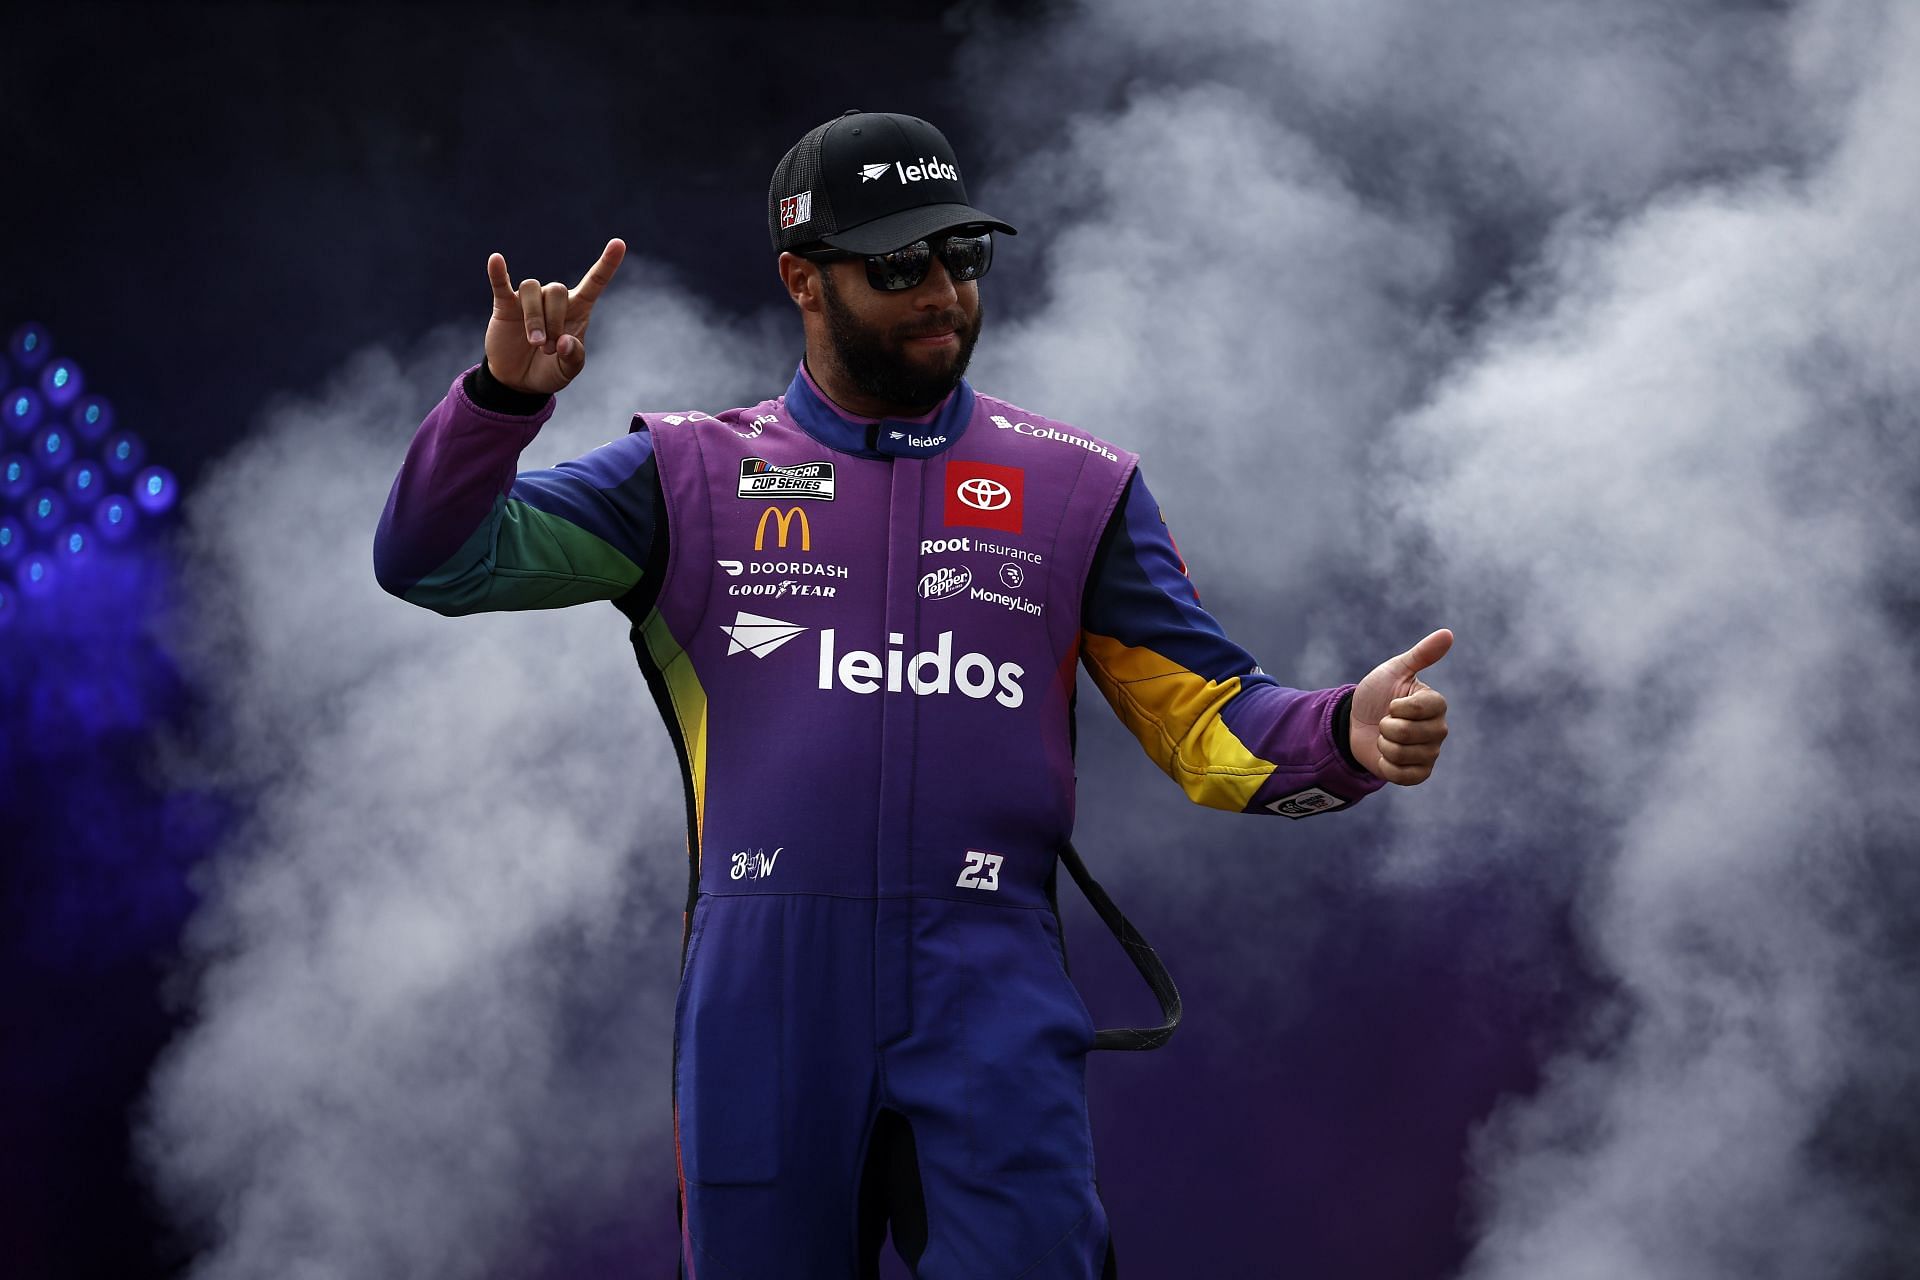 Bubba Wallace Jr. walks onstage during driver intros before the 2022 NASCAR Cup Series Federated Auto Parts 400 at Richmond Raceway in Richmond, Virginia (Photo by Chris Graythen/Getty Images)